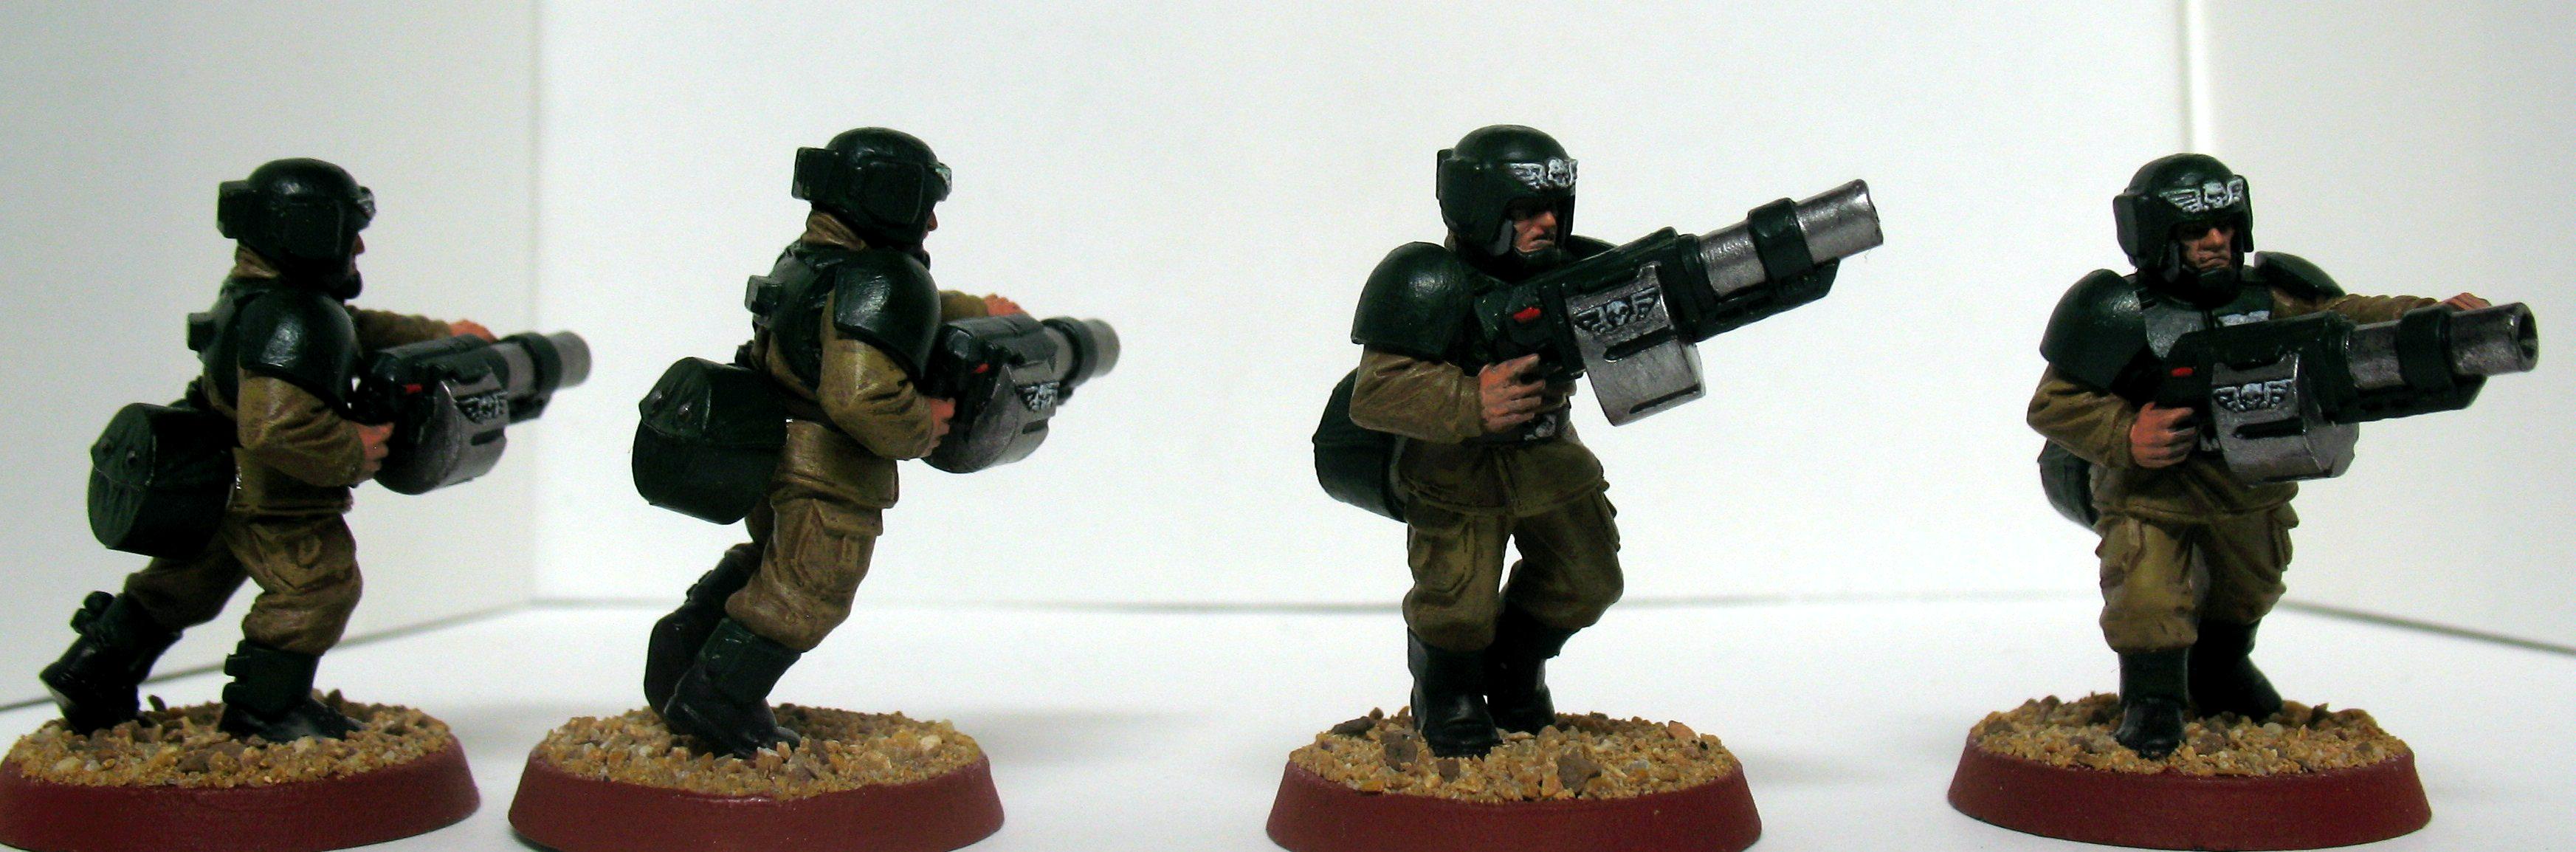 Cadians, Grenade Launcher, Imperial Guard